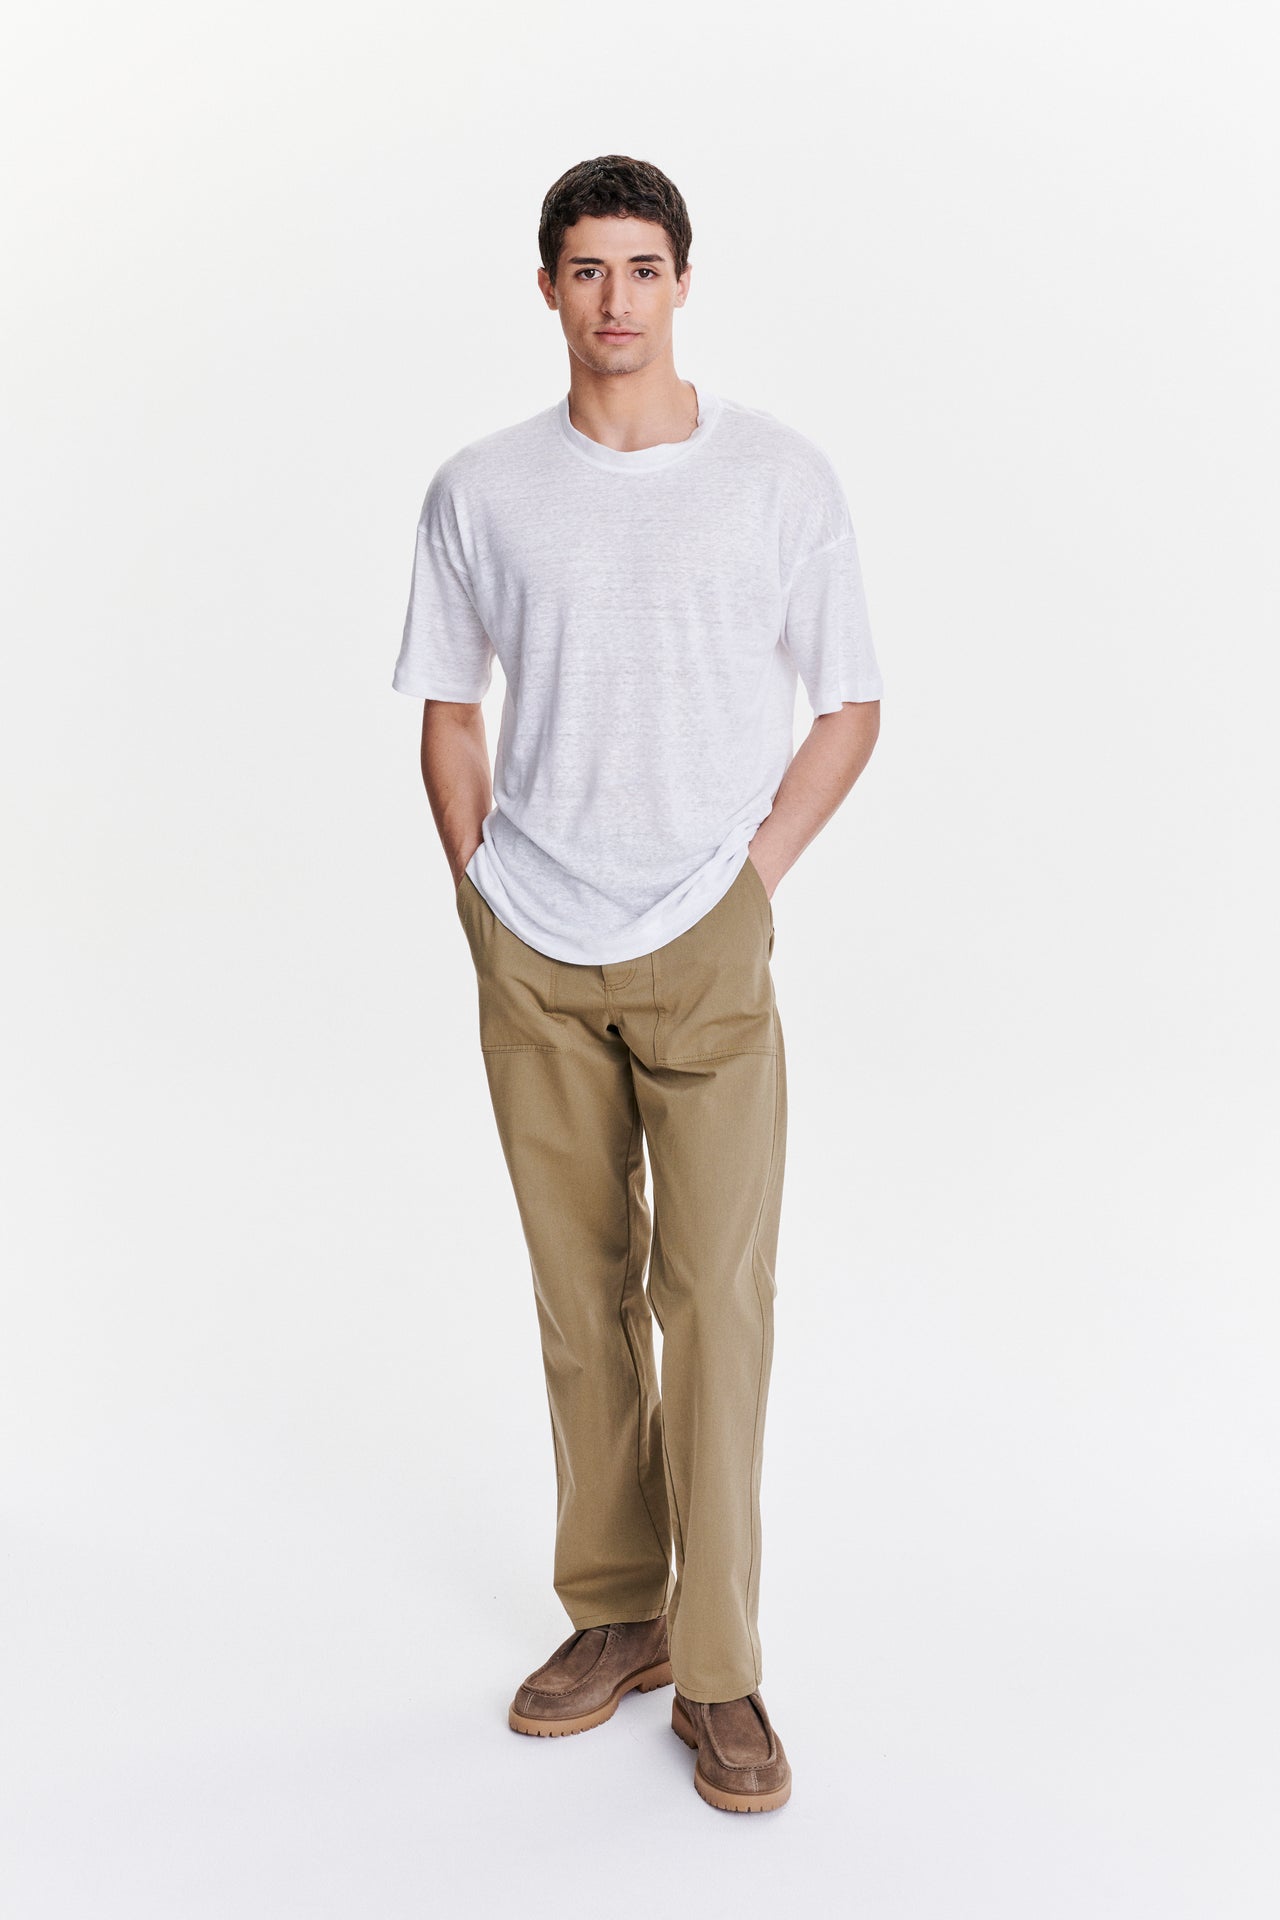 T-Shirt in a White Lithuanian airy Linen Jersey